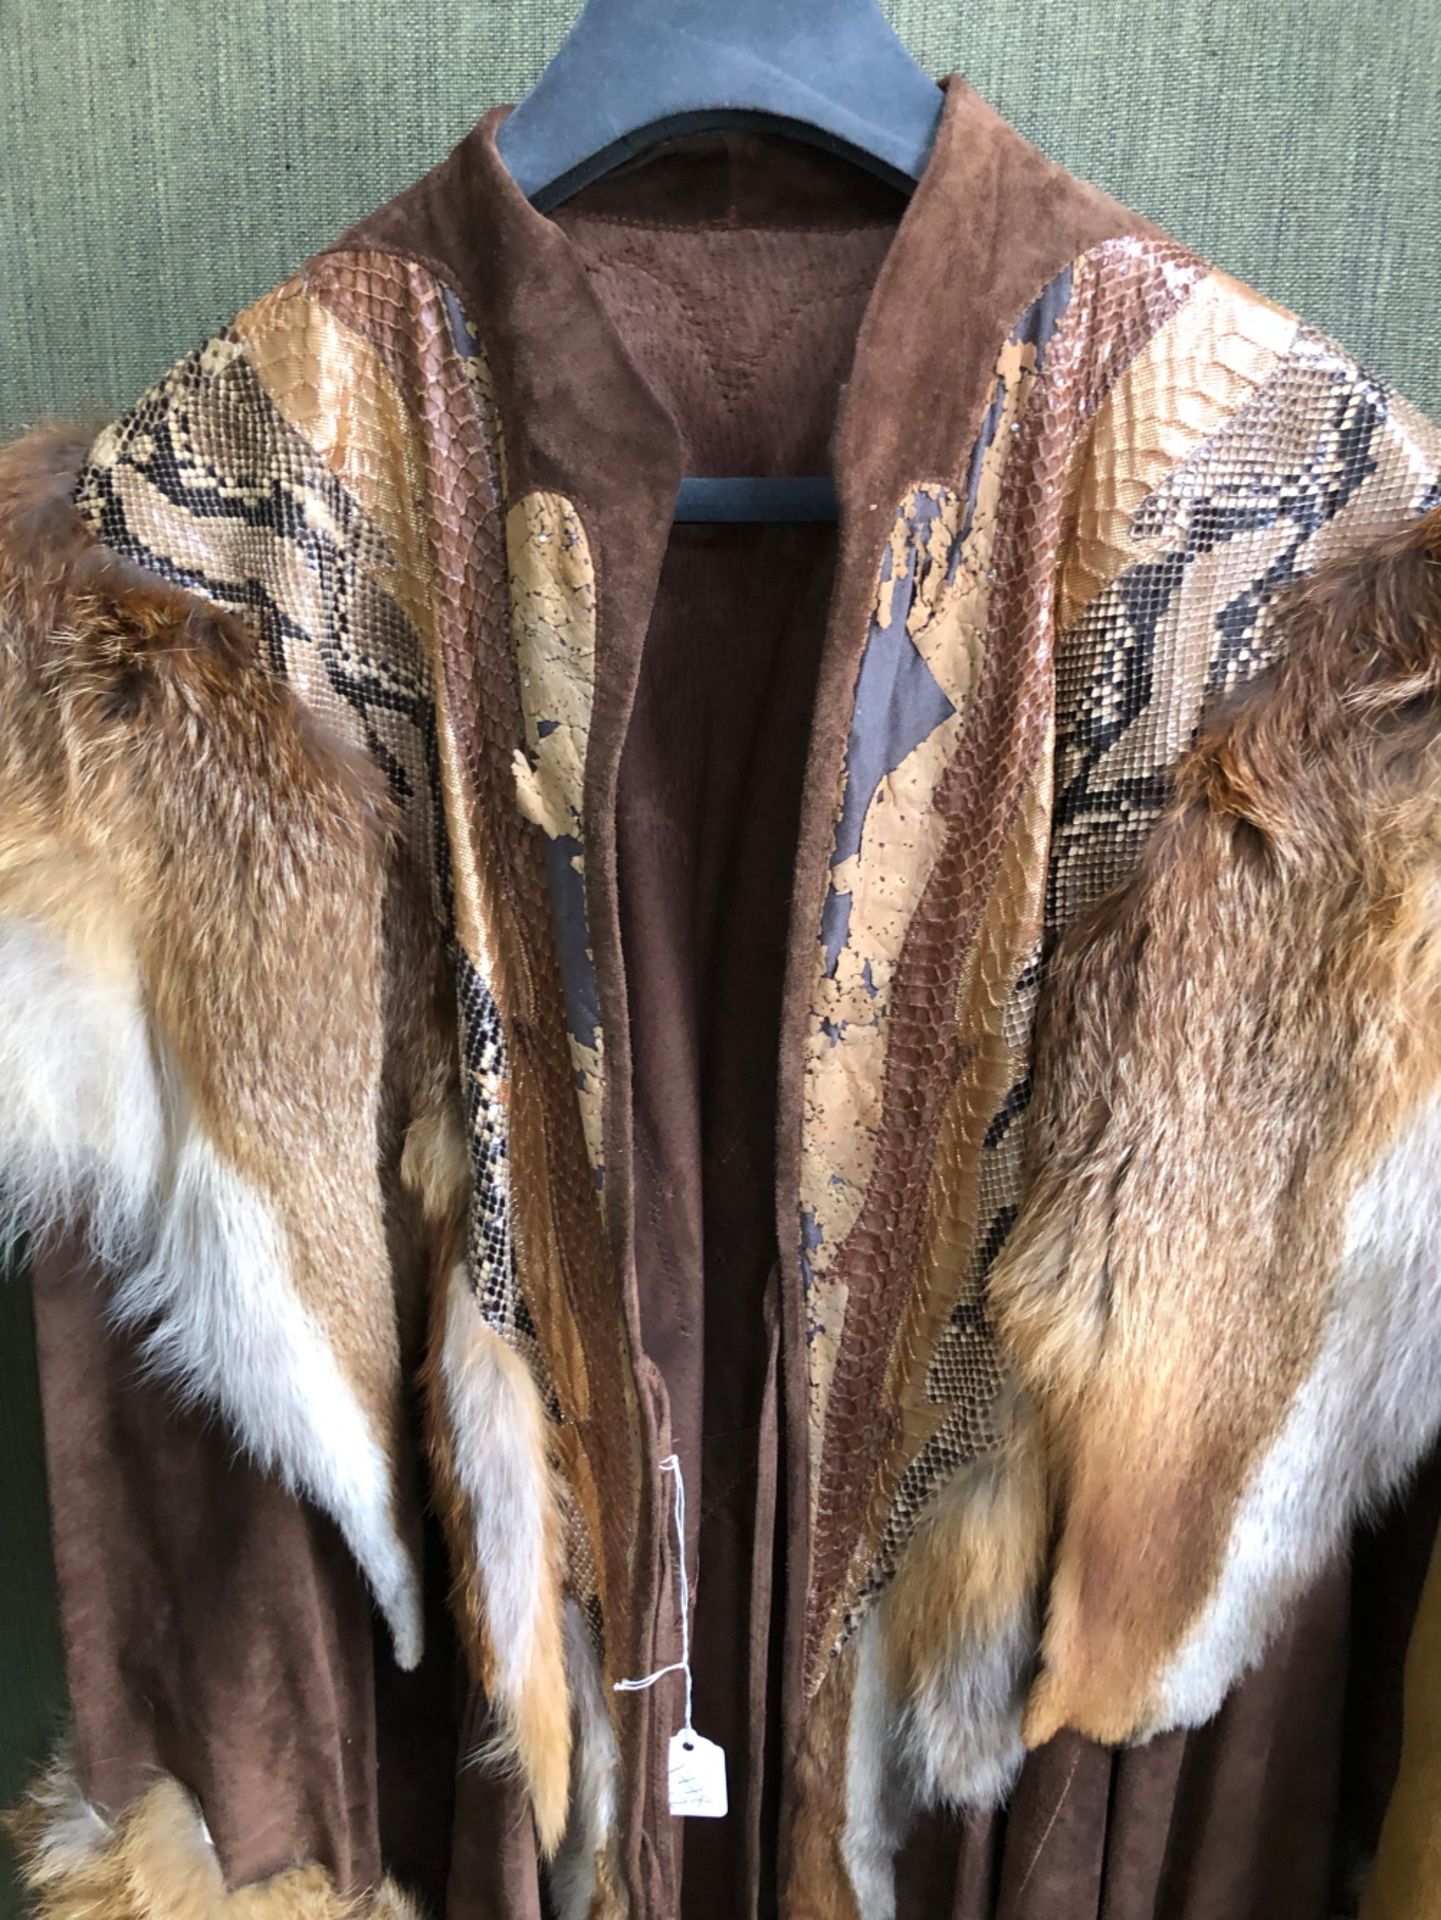 JACKETS: STRIWA 3/4 LENGTH FAWN COLOURED SHEEP SKIN JACKET WITH HOOD SIZE STATED EUR 36, TOGETHER - Image 2 of 21